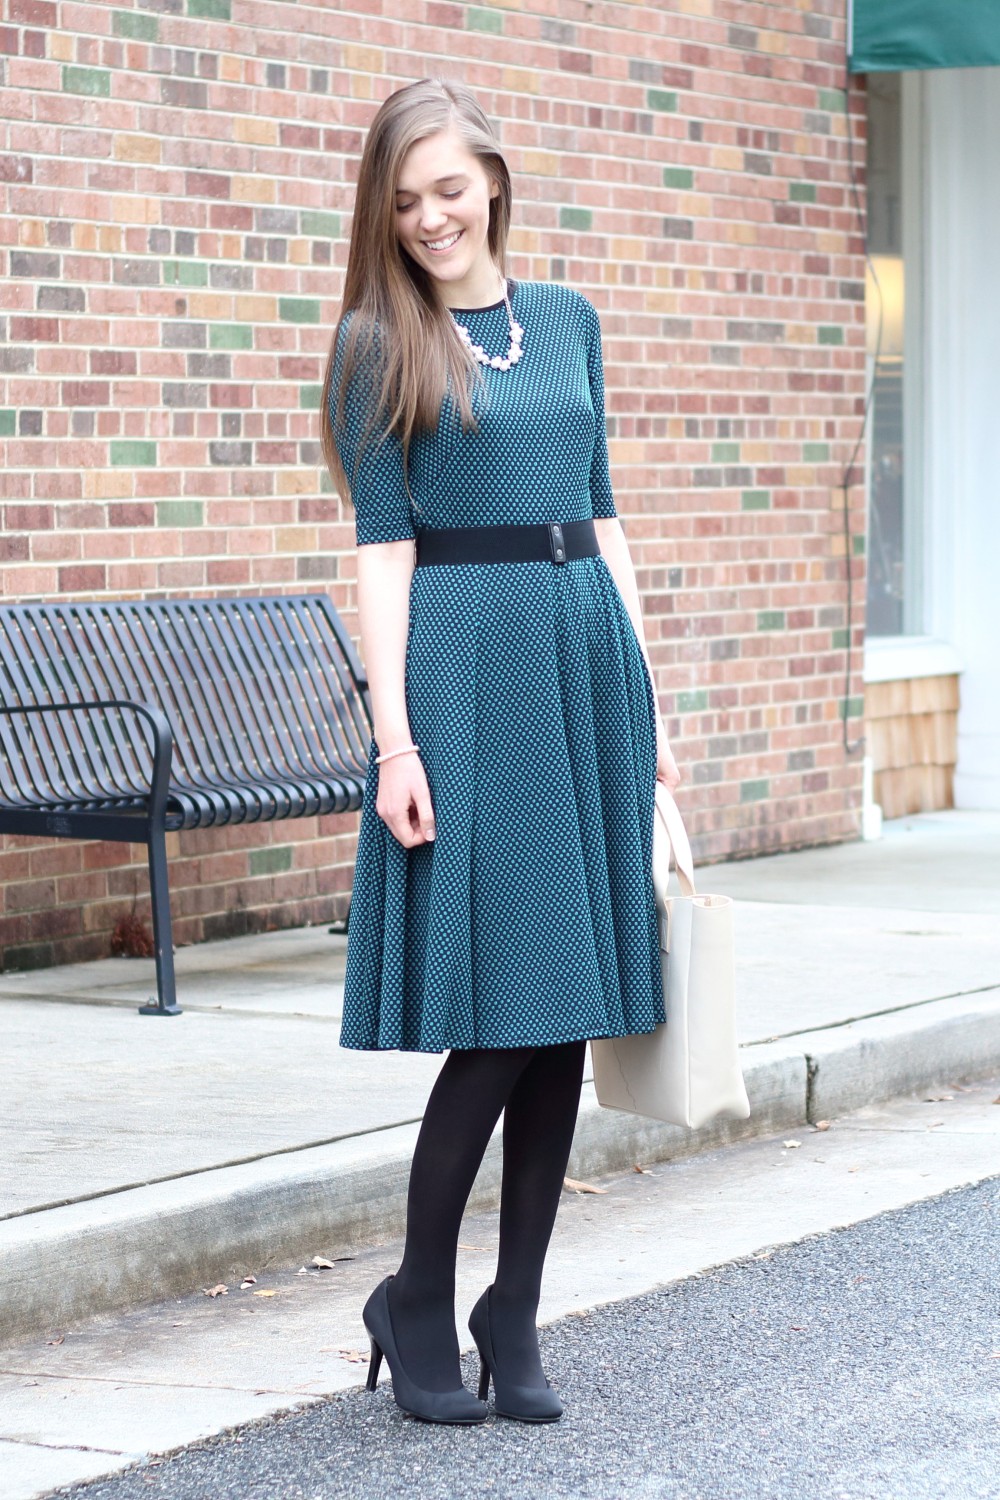 Favorite Winter Dress+How To Deal With Criticism As A Blogger